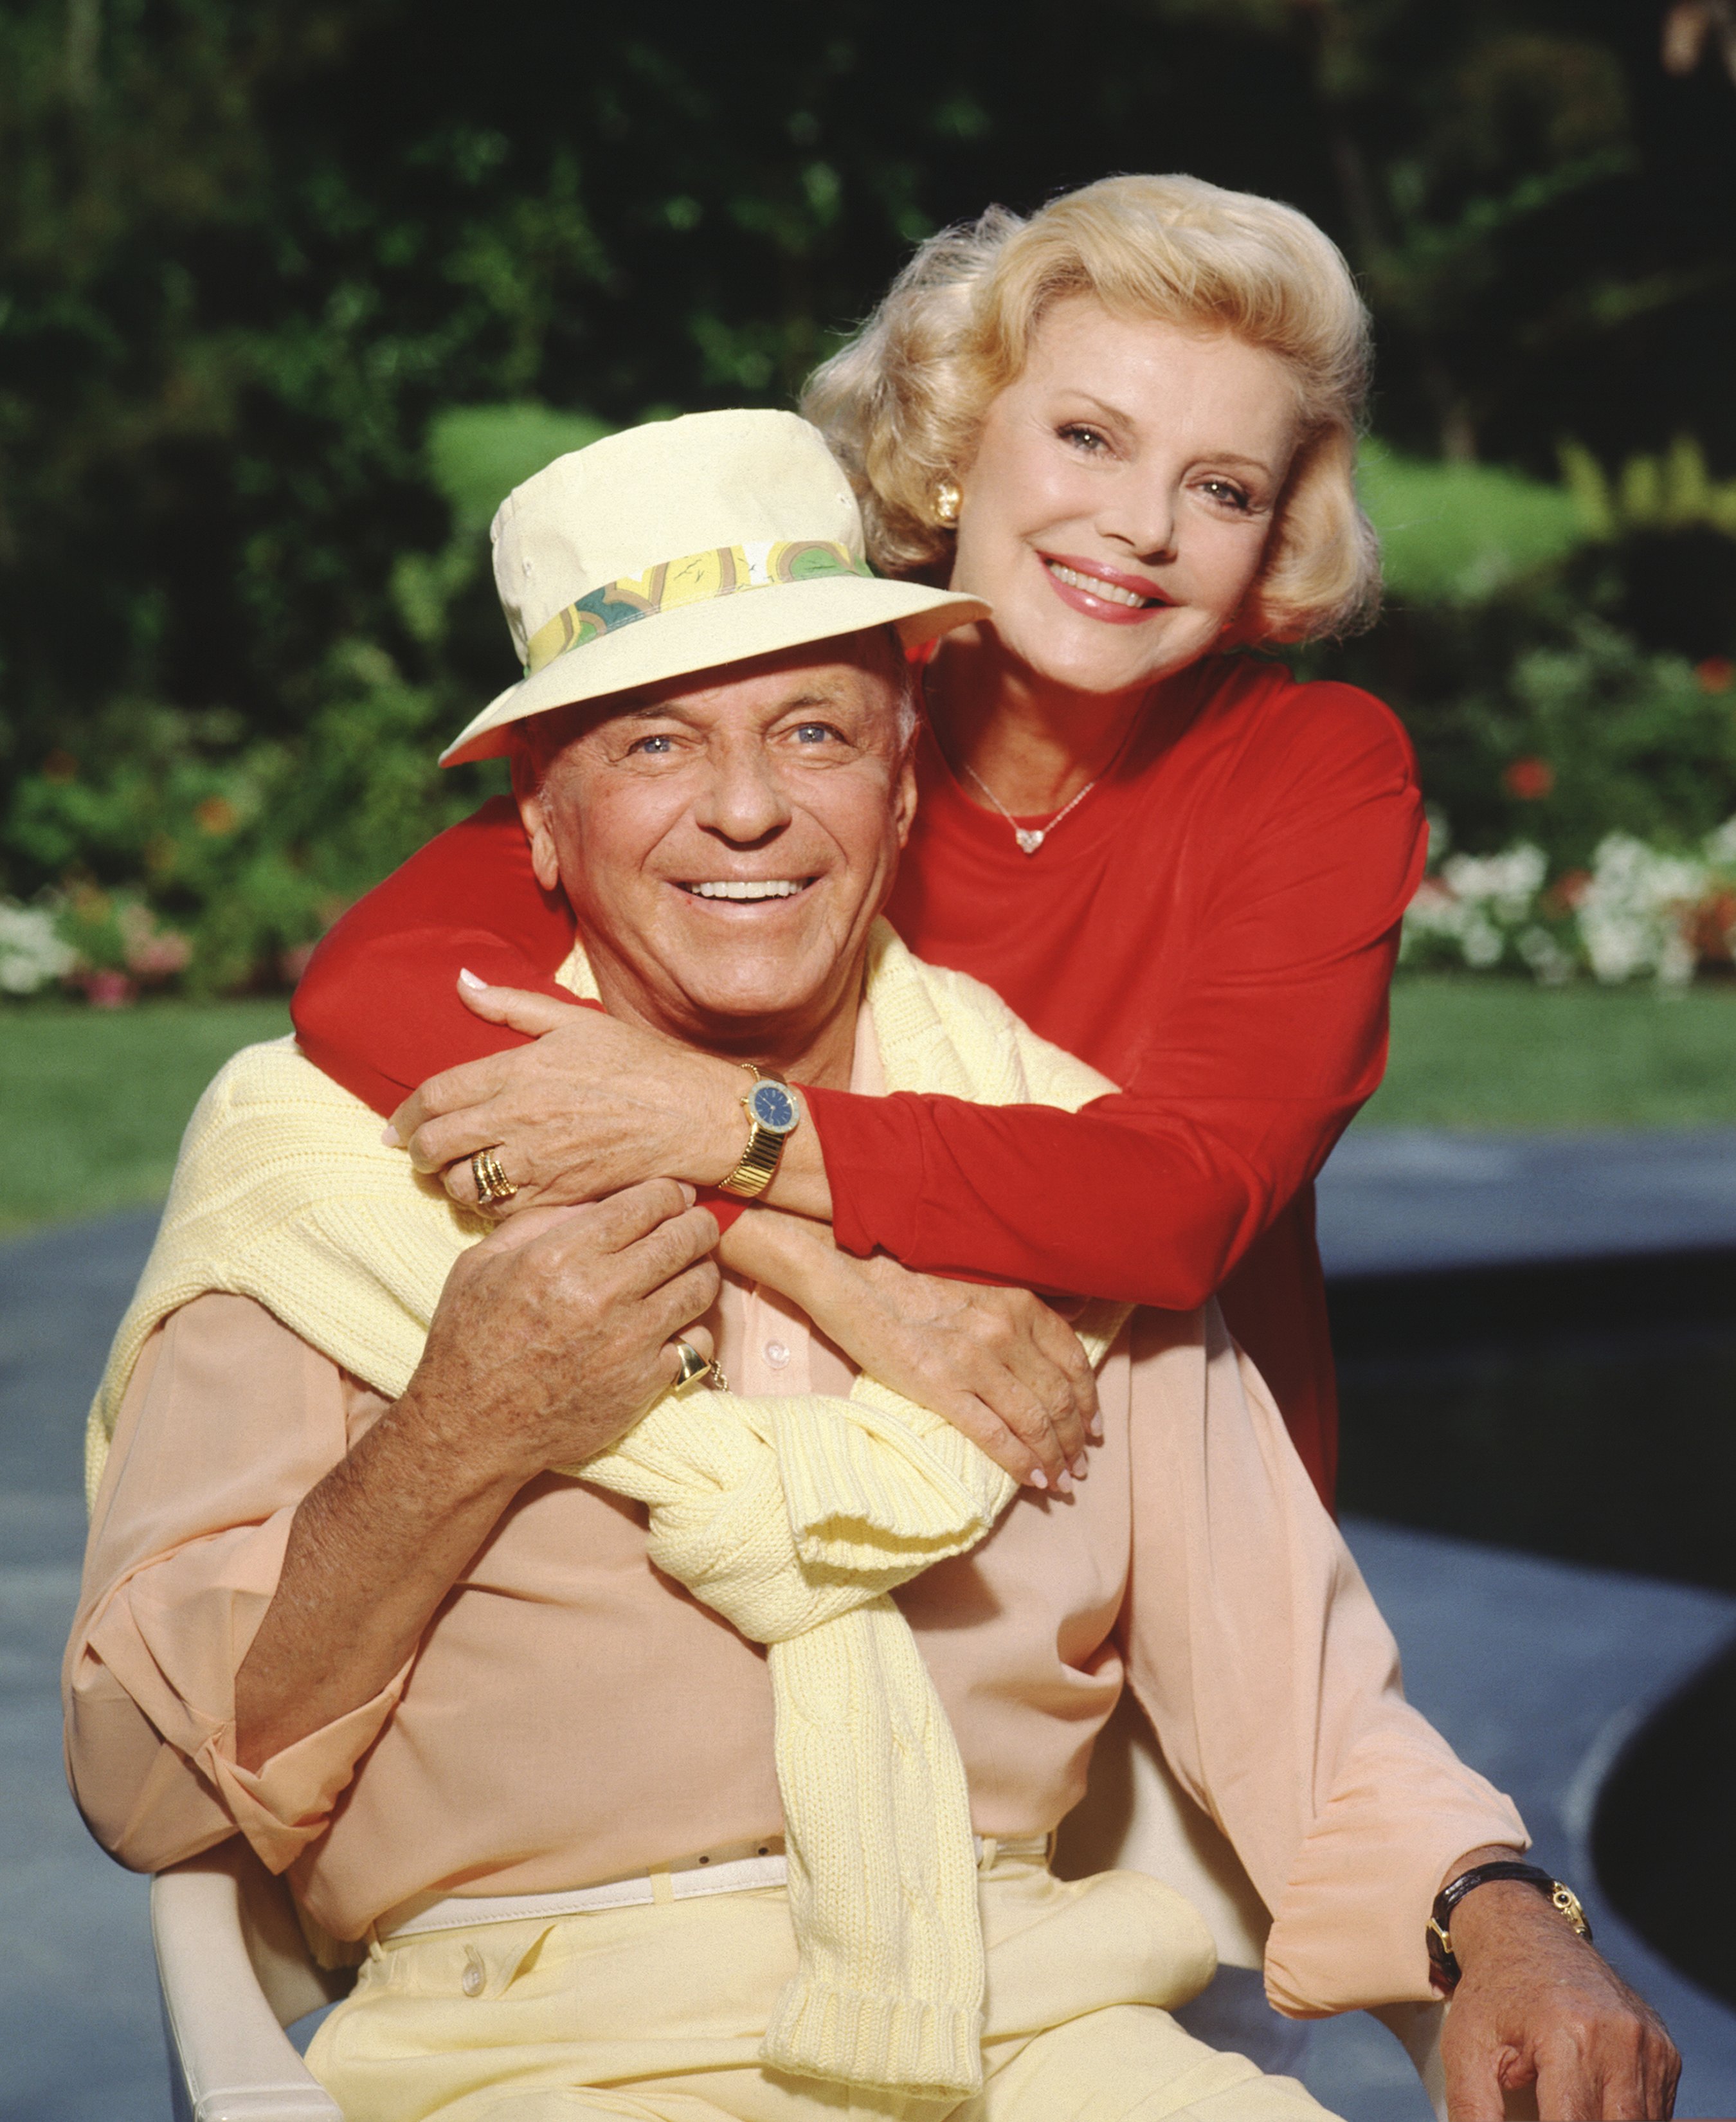 Frank Sinatra and Barbara Sinatra pose for a portrait in Los Angeles, California in 1990 | Source: Getty Images